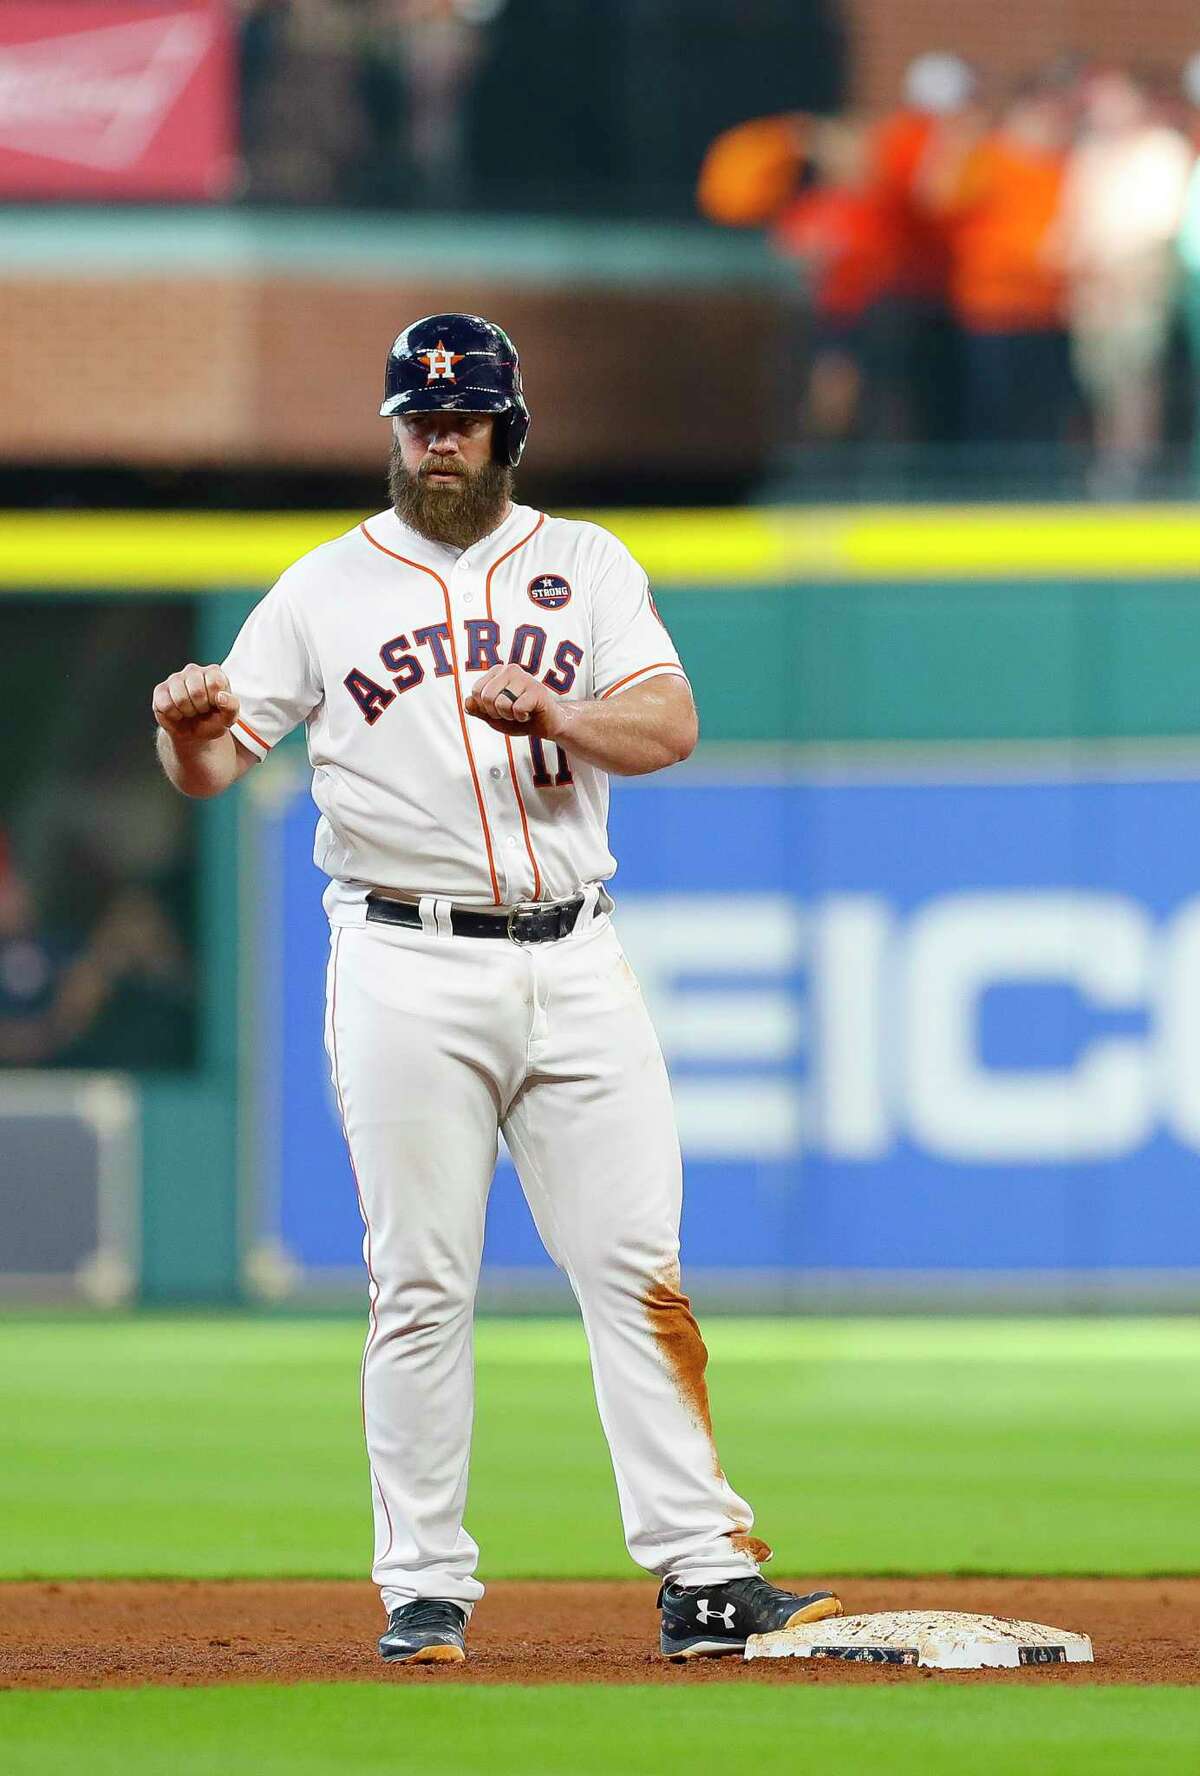 The Astros' Evan Gattis fell behind in the count 0-2 against Chris Sale but later saw a pitch to hit for a double in Game 1.